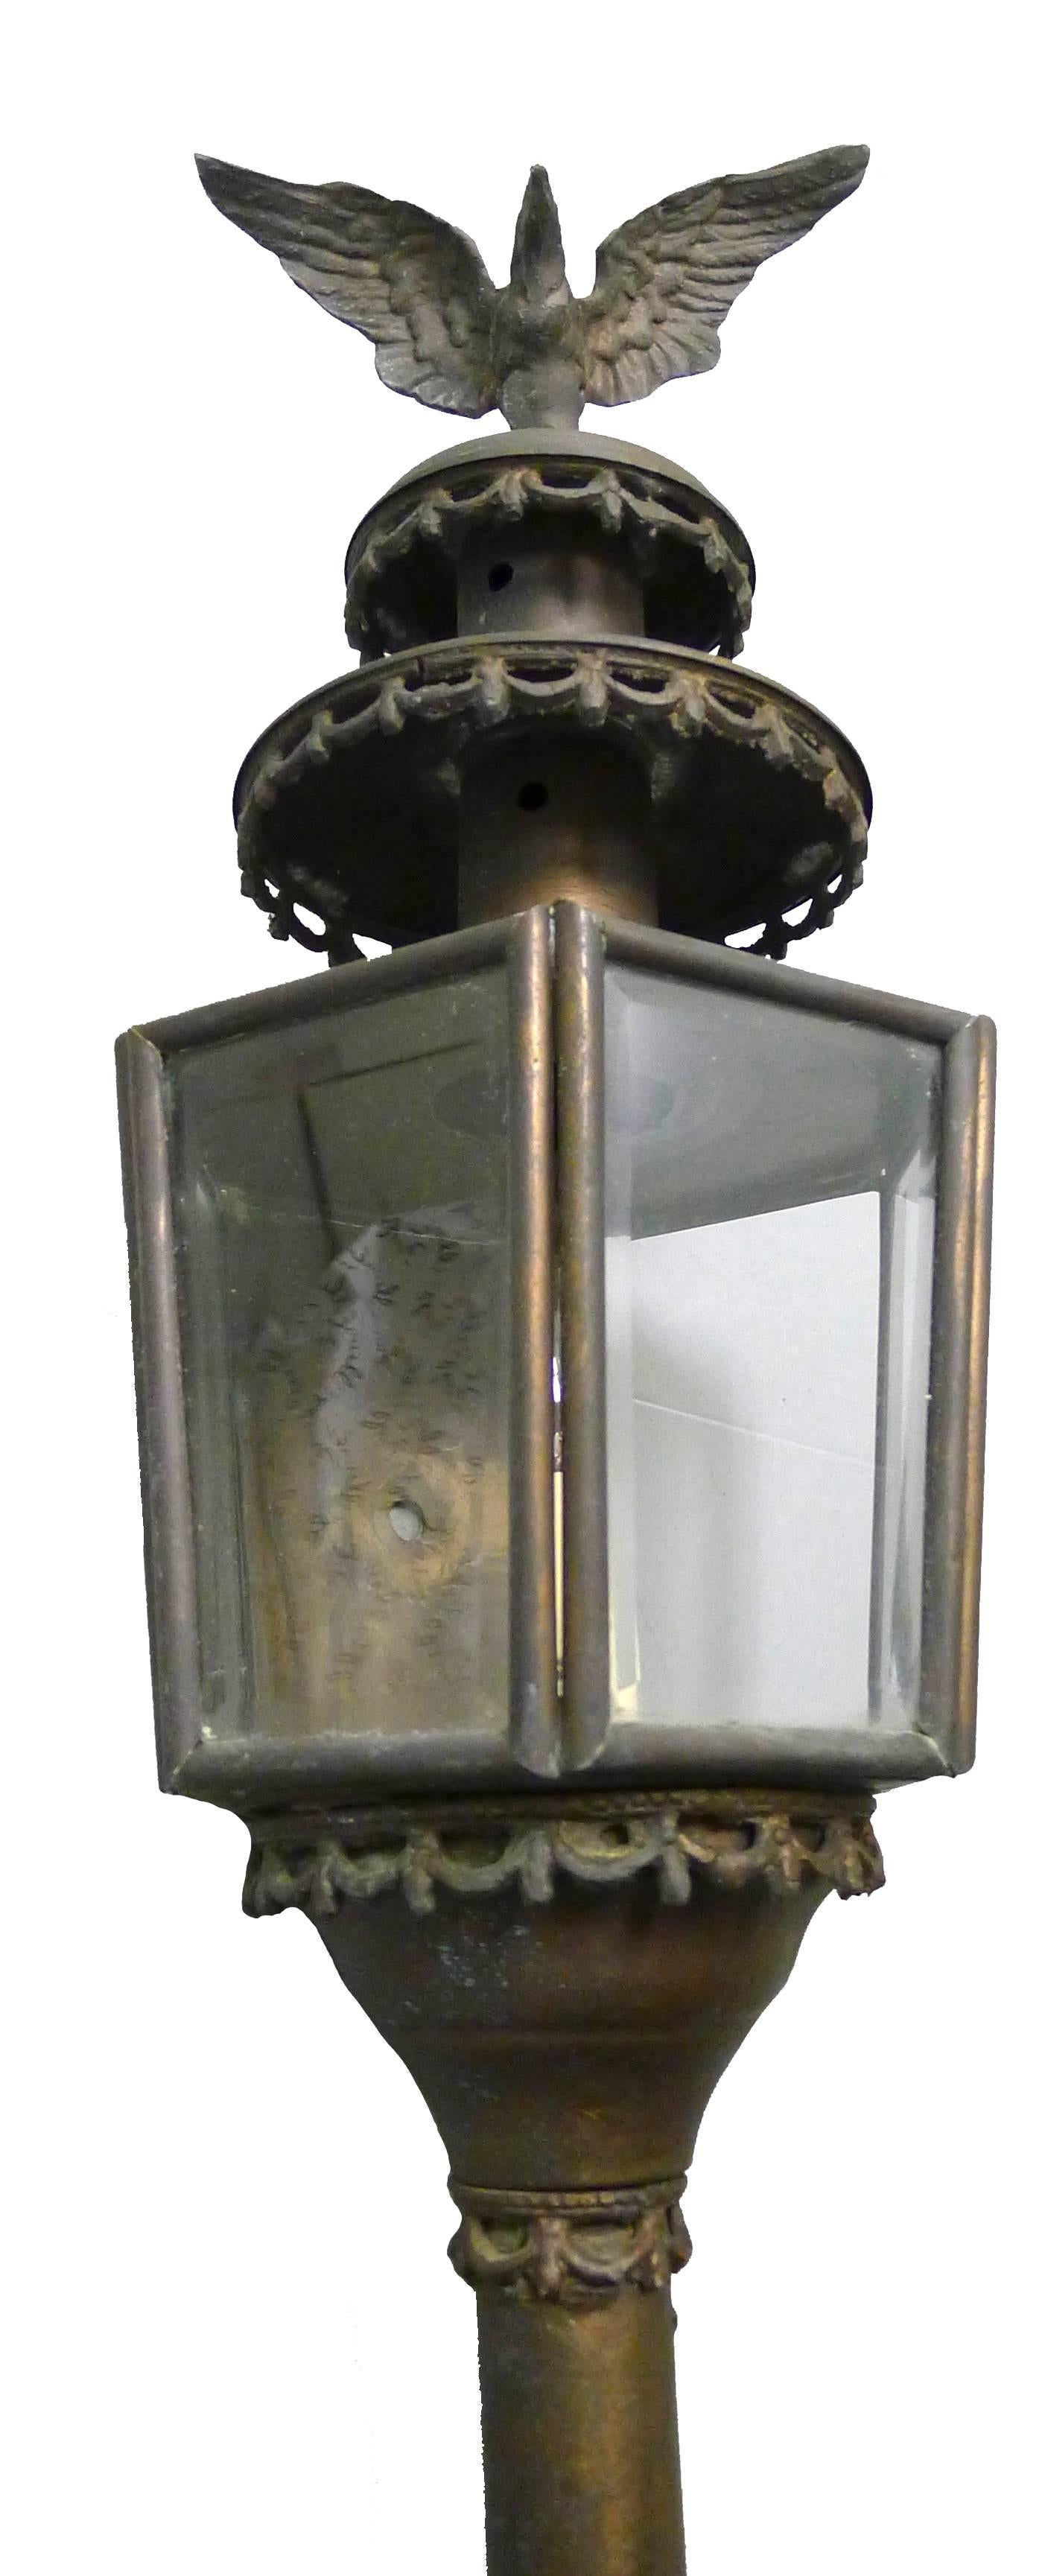 Pair of 1880s American brass Federal style eagle motif coach lanterns. Newly rewired. Each light takes one candelabra bulb. Most recently used as wall sconces on a porch. From a Greenwich, Ct waterfront estate.